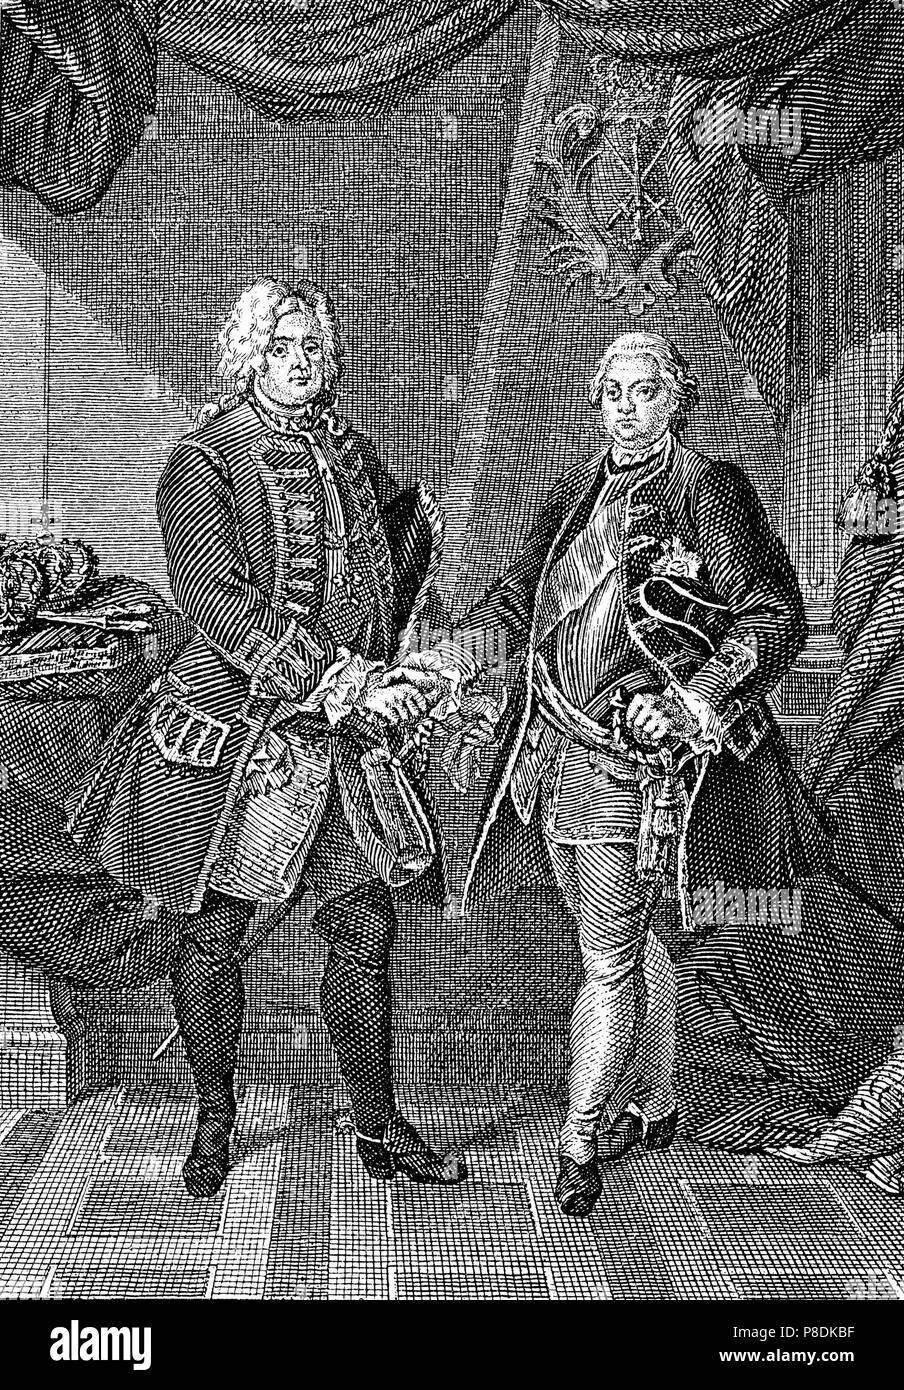 The Fraternization of Kings Frederick I of Prussia and Augustus II of Poland. Museum: PRIVATE COLLECTION. Stock Photo